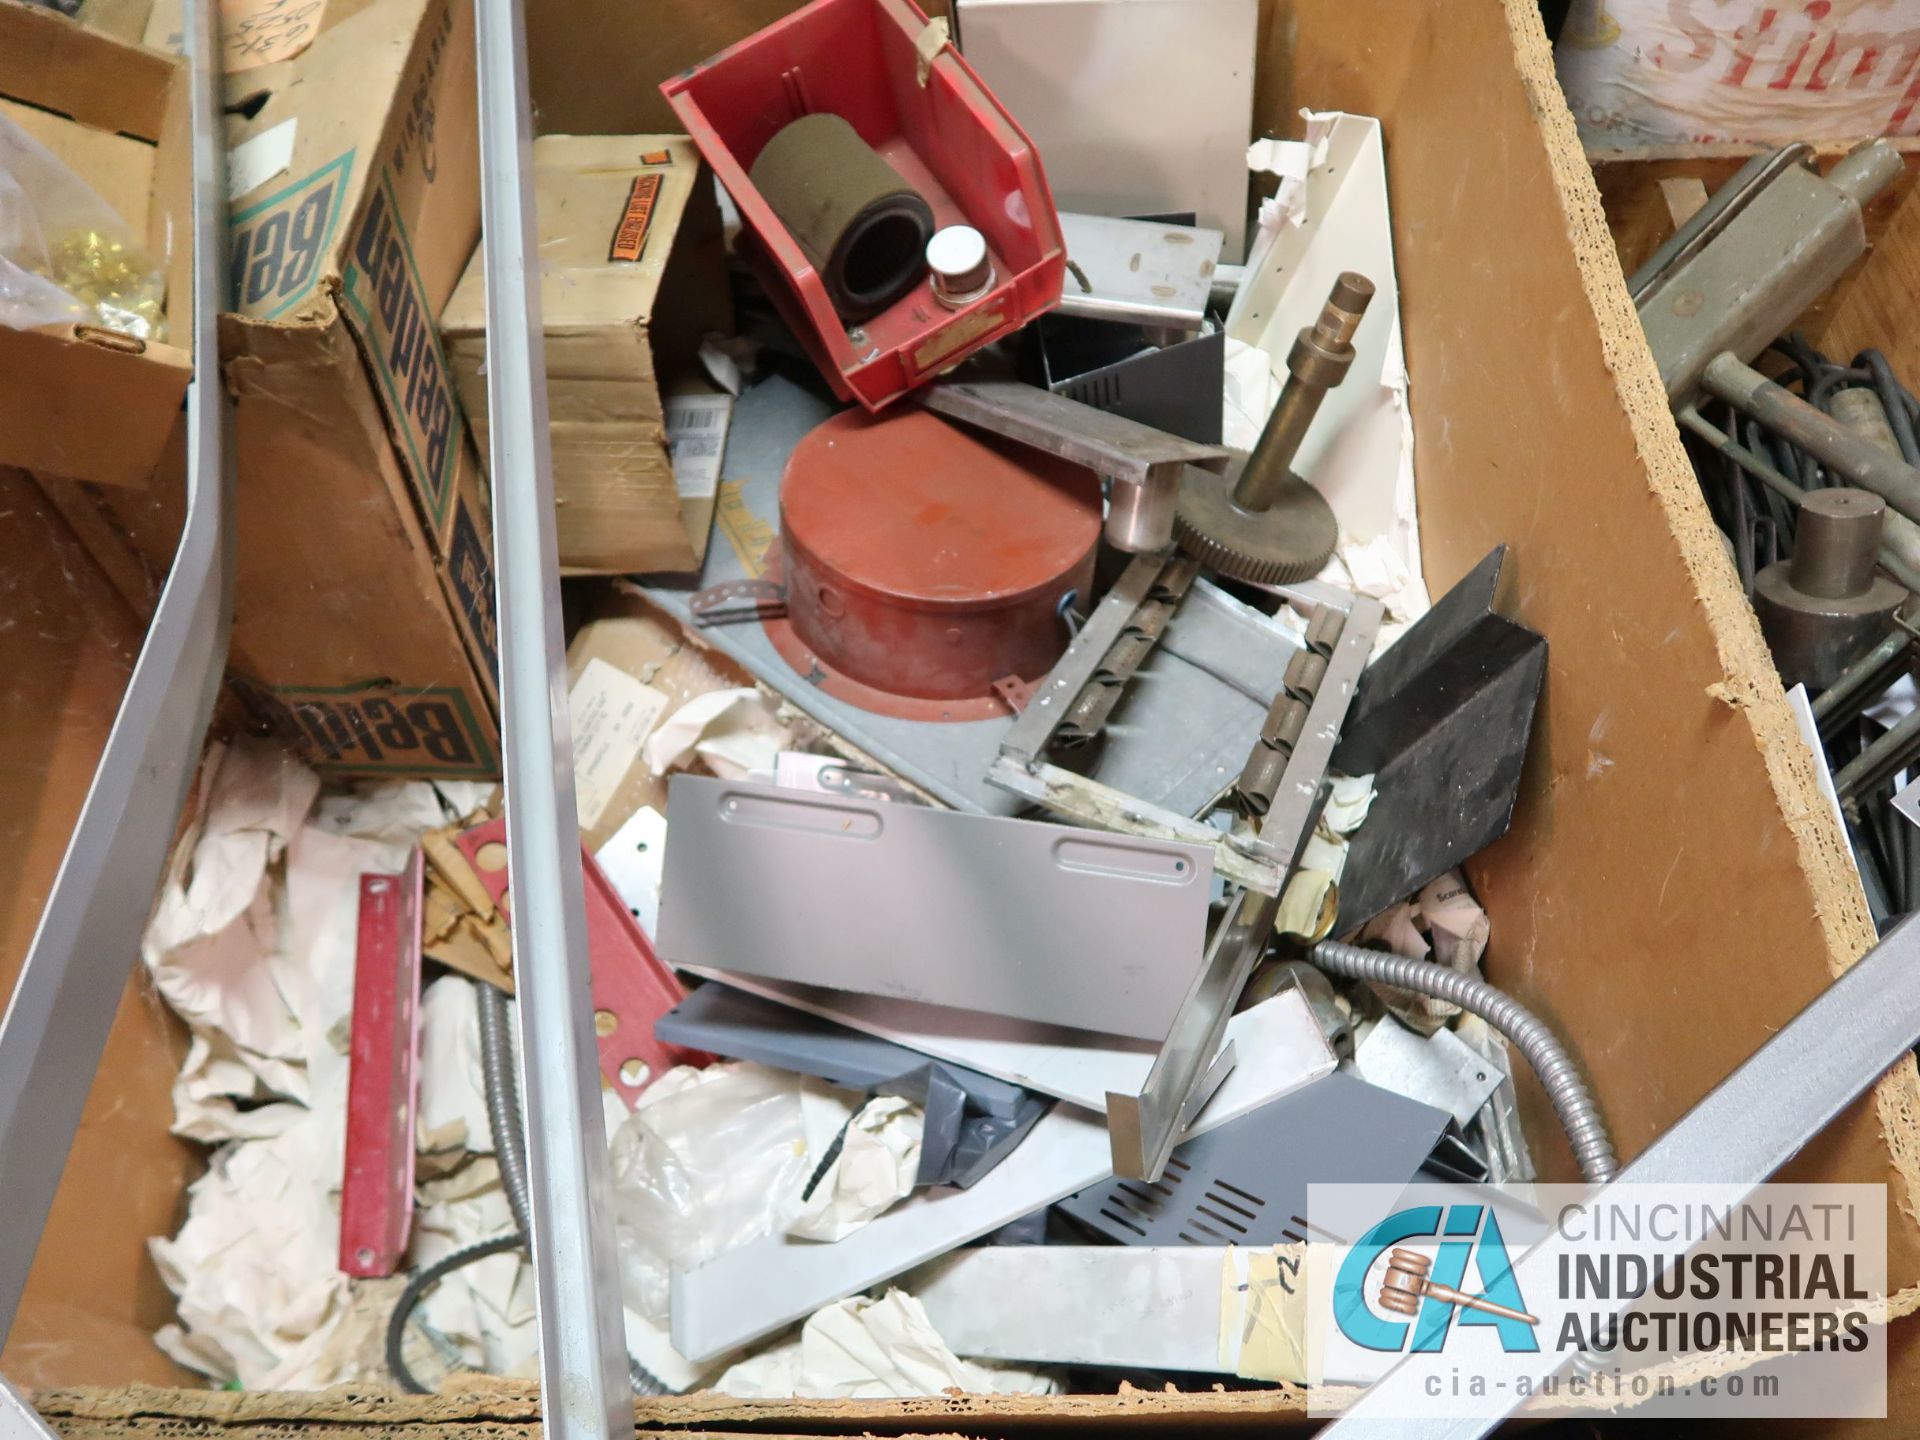 (LOT) CONTENTS OF (1) RAND AND FLOOR INCLUDING MISCELLANEOUS SCRAP METAL **NO RACK** - Image 11 of 18